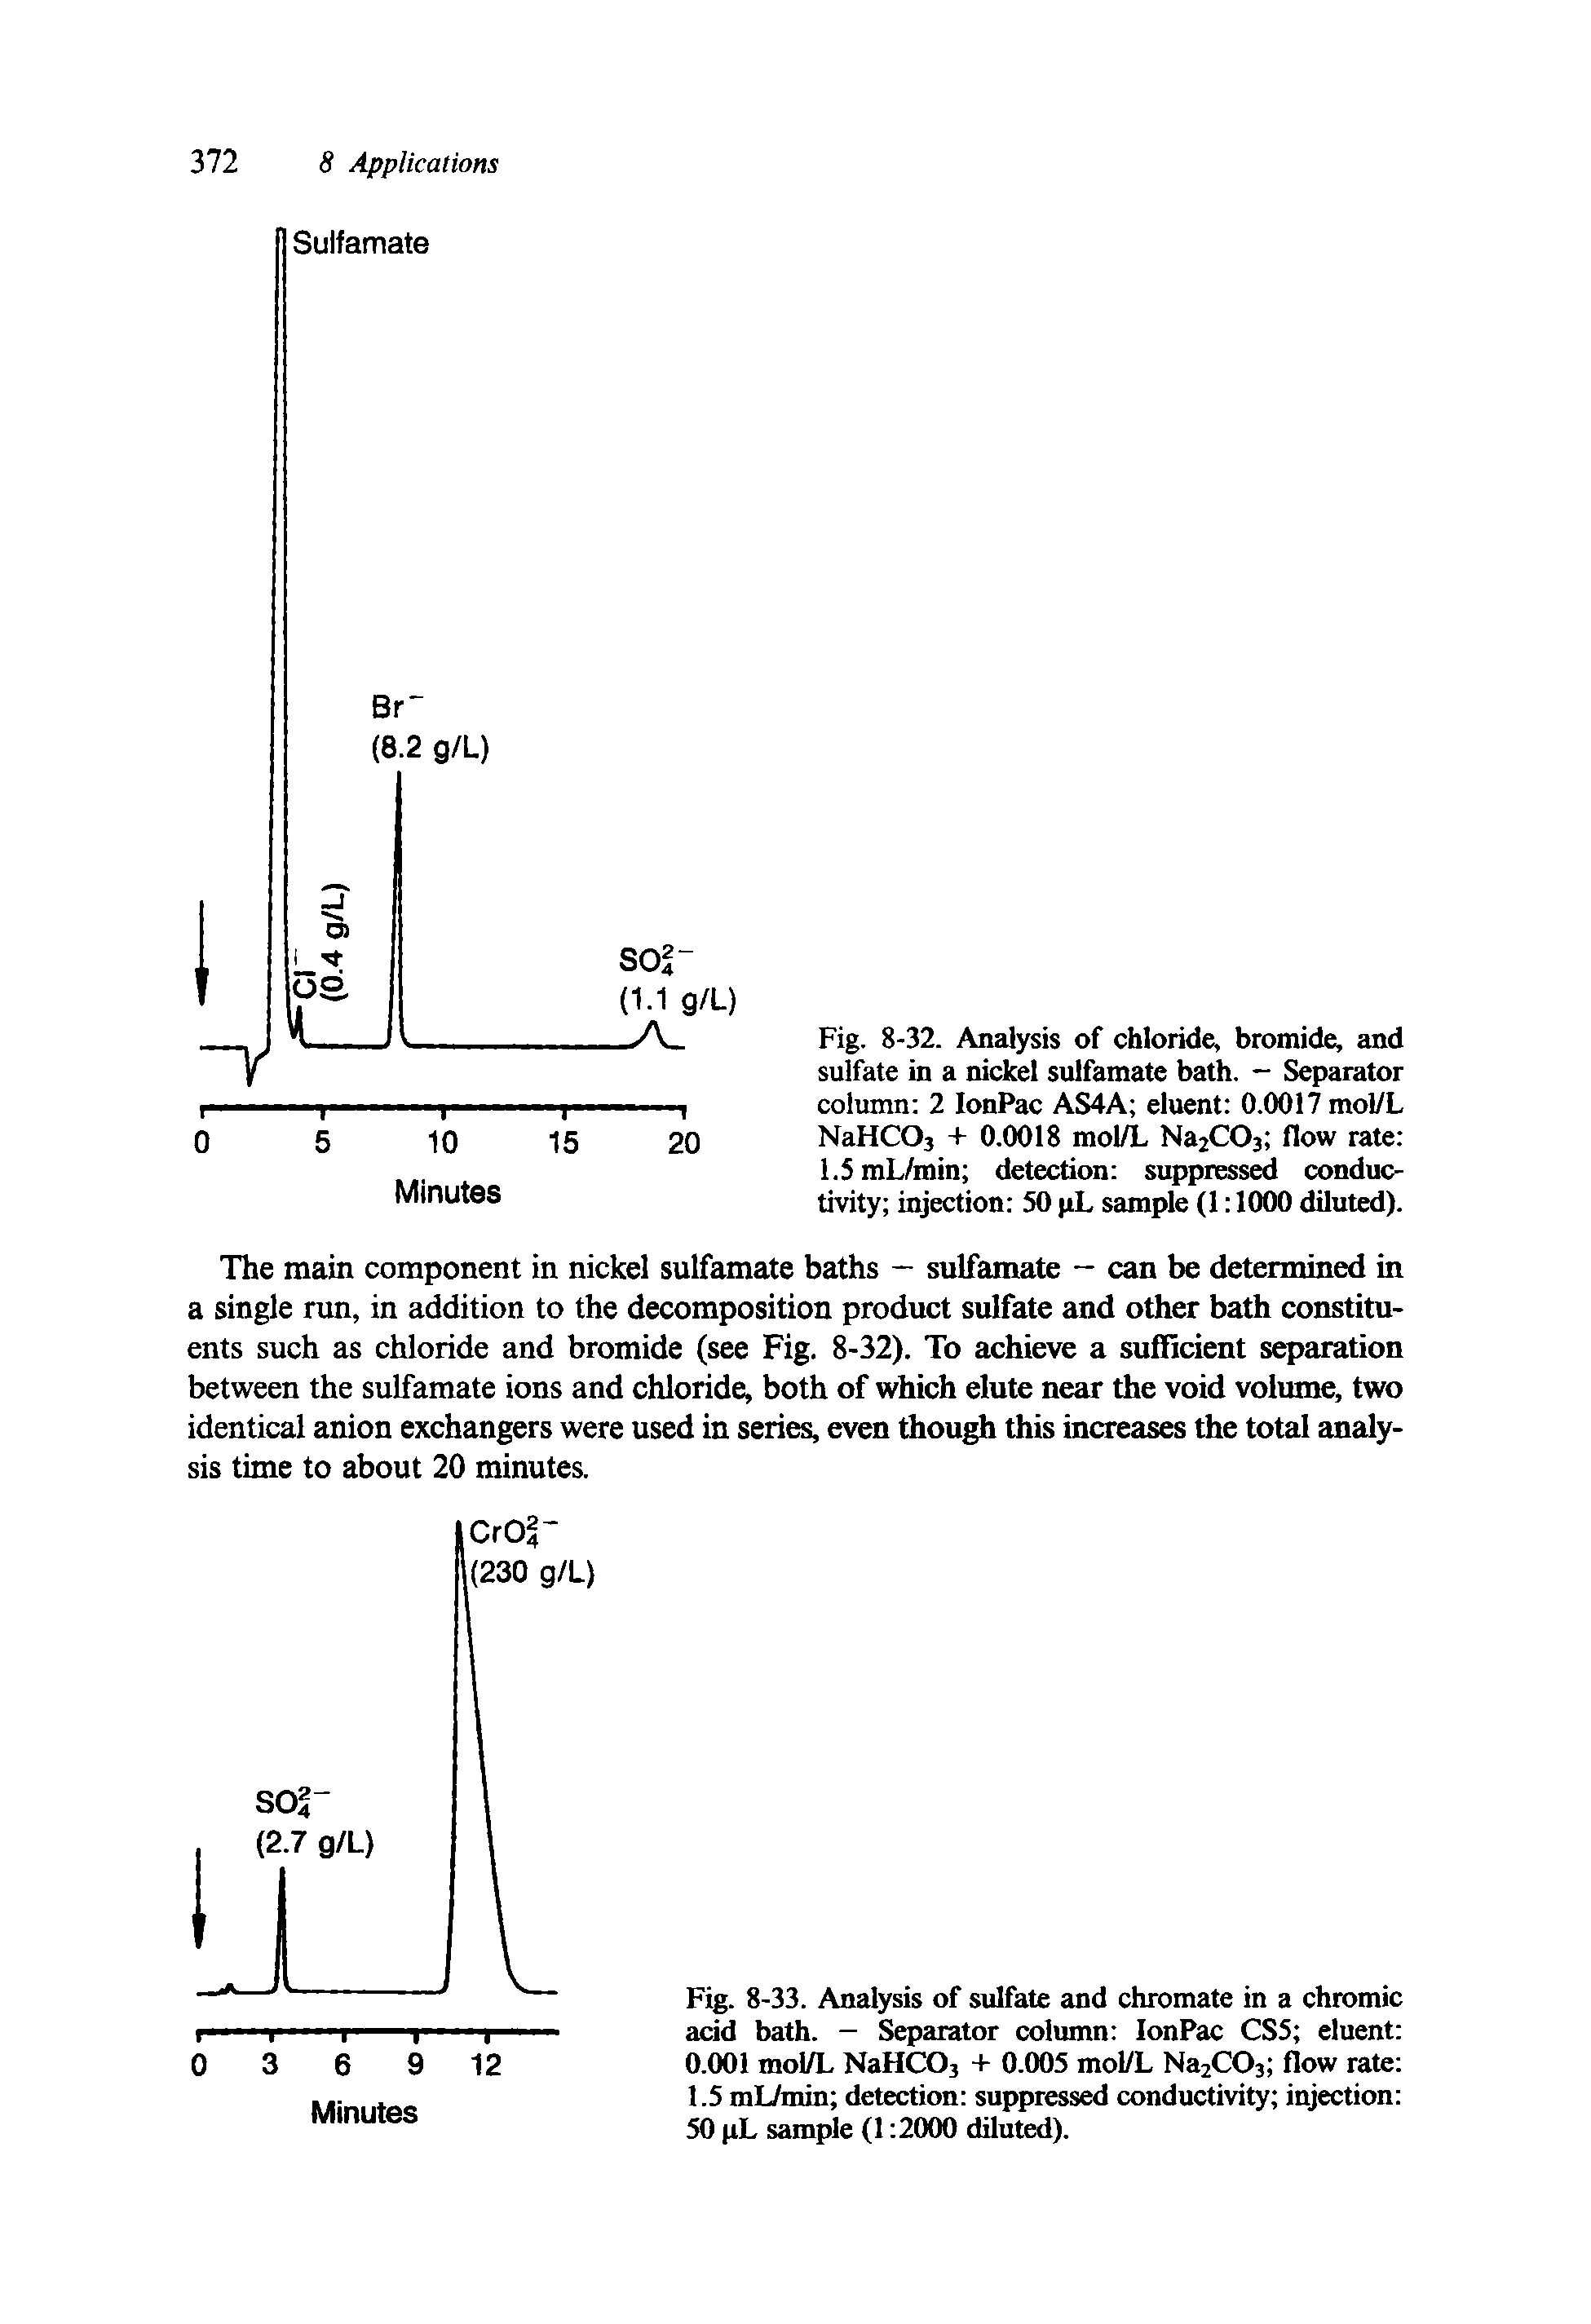 Fig. 8-32. Analysis of chloride, bromide, and sulfate in a nickel sulfamate bath. - Separator column 2 IonPac AS4A eluent 0.0017 mol/L NaHC03 + 0.0018 mol/L Na2C03 flow rate 1.5mL/min detection suppressed conductivity injection 50 pL sample (1 1000 diluted).